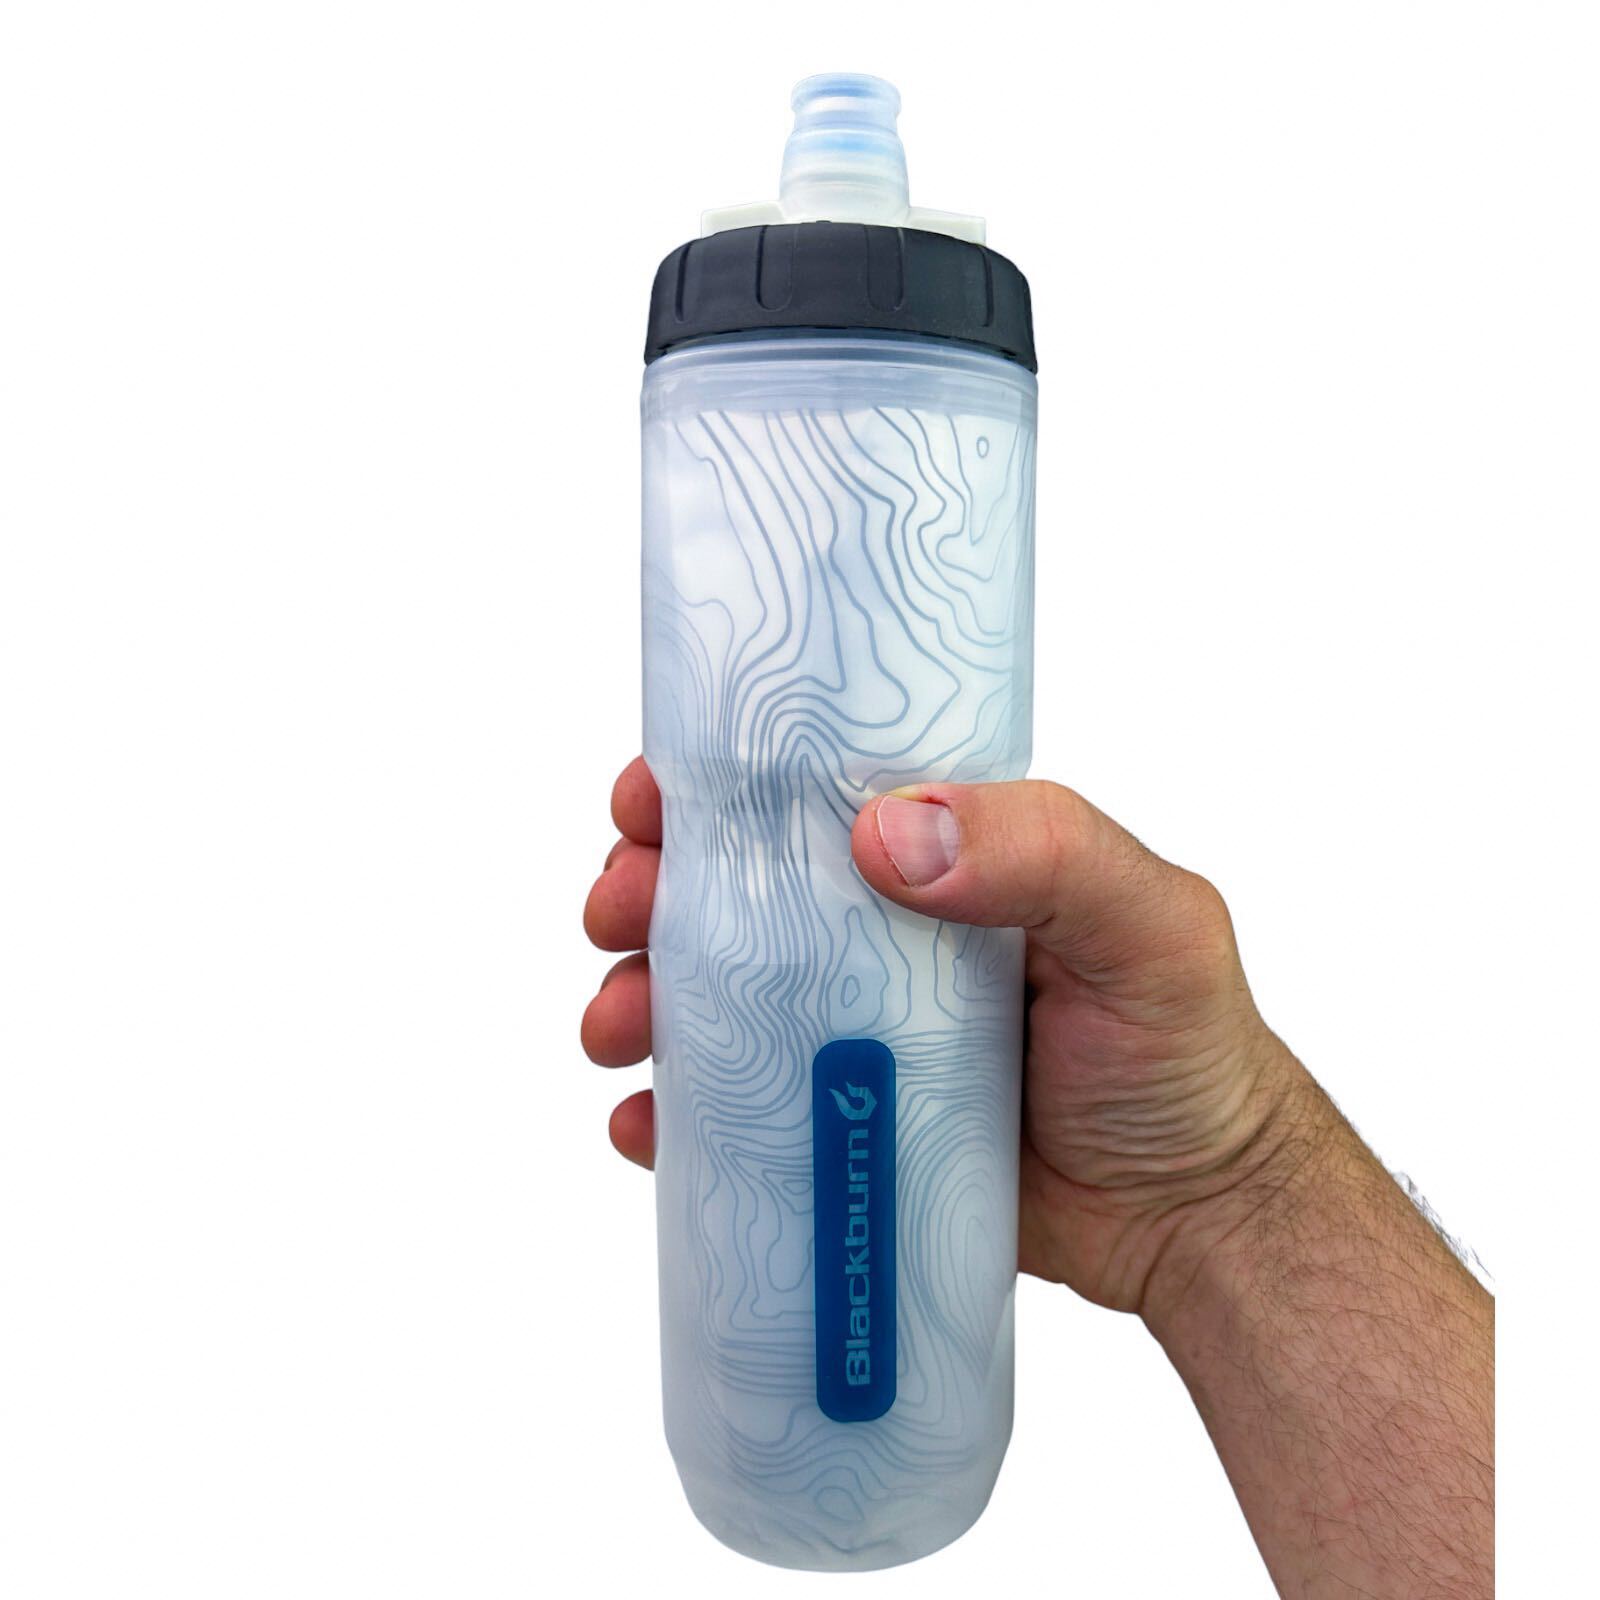 Blackburn Locking Valve Insulated Bike Cage Bottle - 22 Oz - Perfect for biking of course, but also perfect for hiking and more - Folks, these are $15 in stores! Order 2 or more and SHIPPING IS FREE!